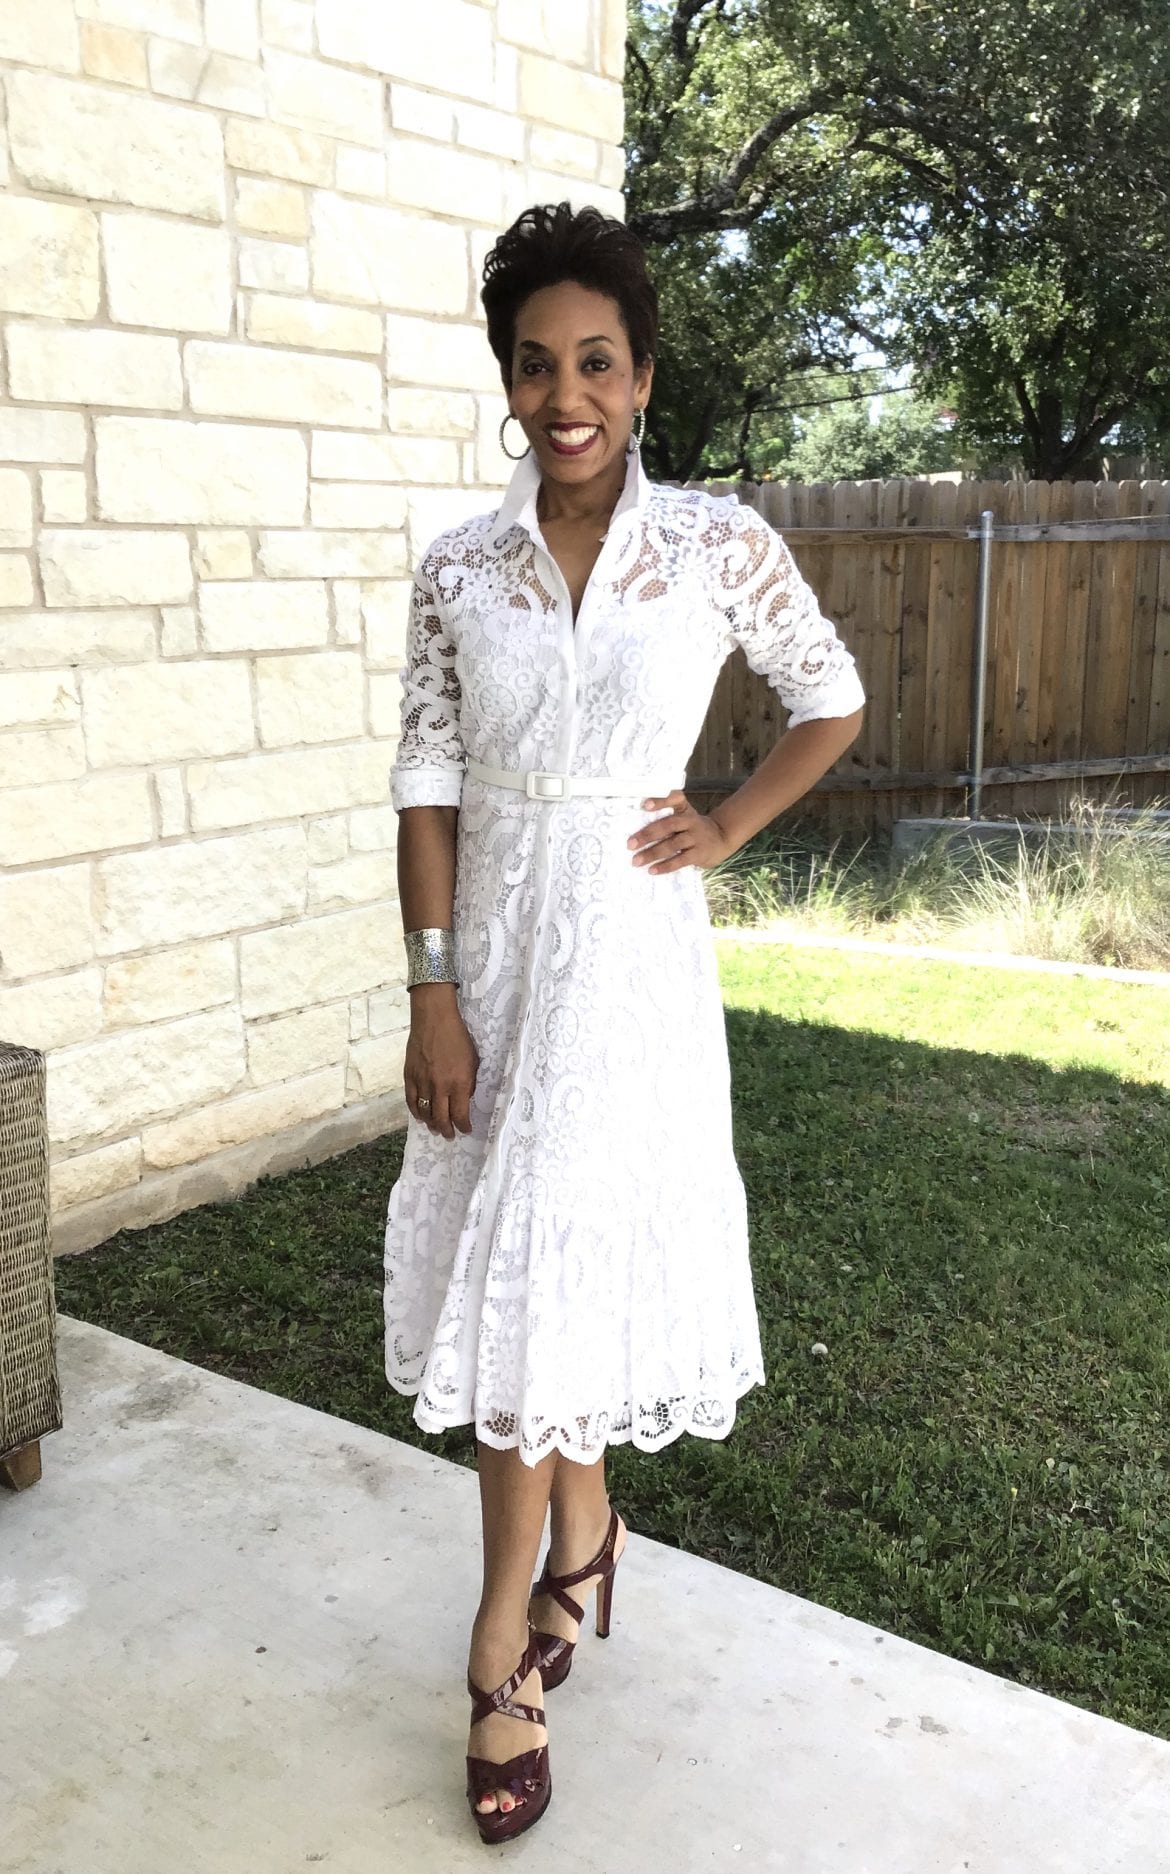 Restylist Catenya McHenry shows 3 Ways to Style a Nanette Lapore White Belted Fit and Flare Lace Dress